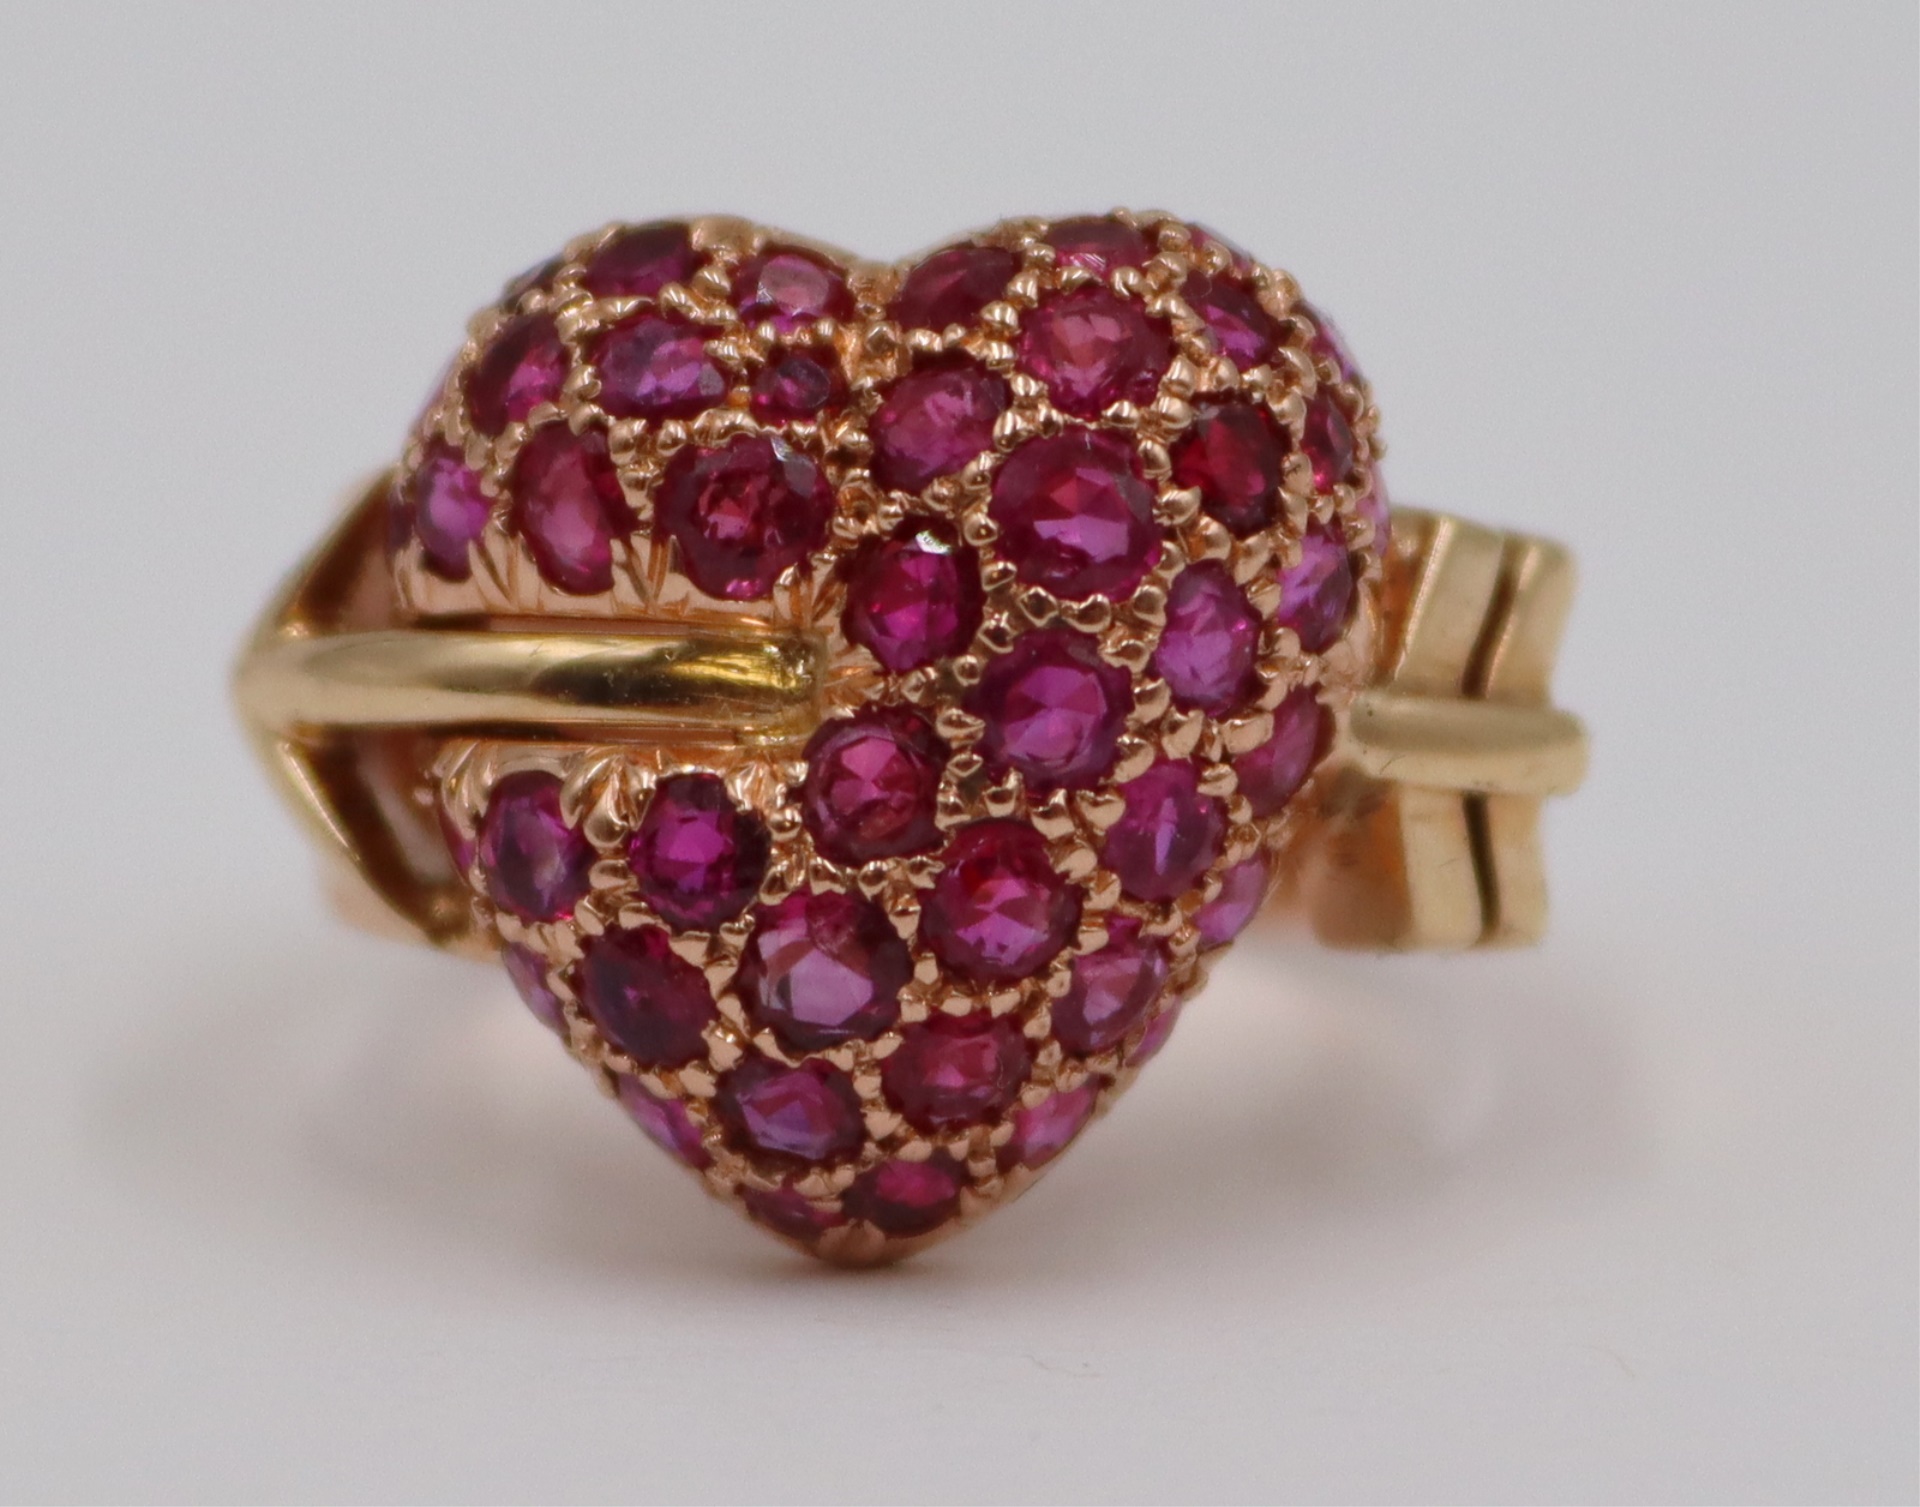 JEWELRY 14KT ROSE GOLD AND RUBY 3be4b2